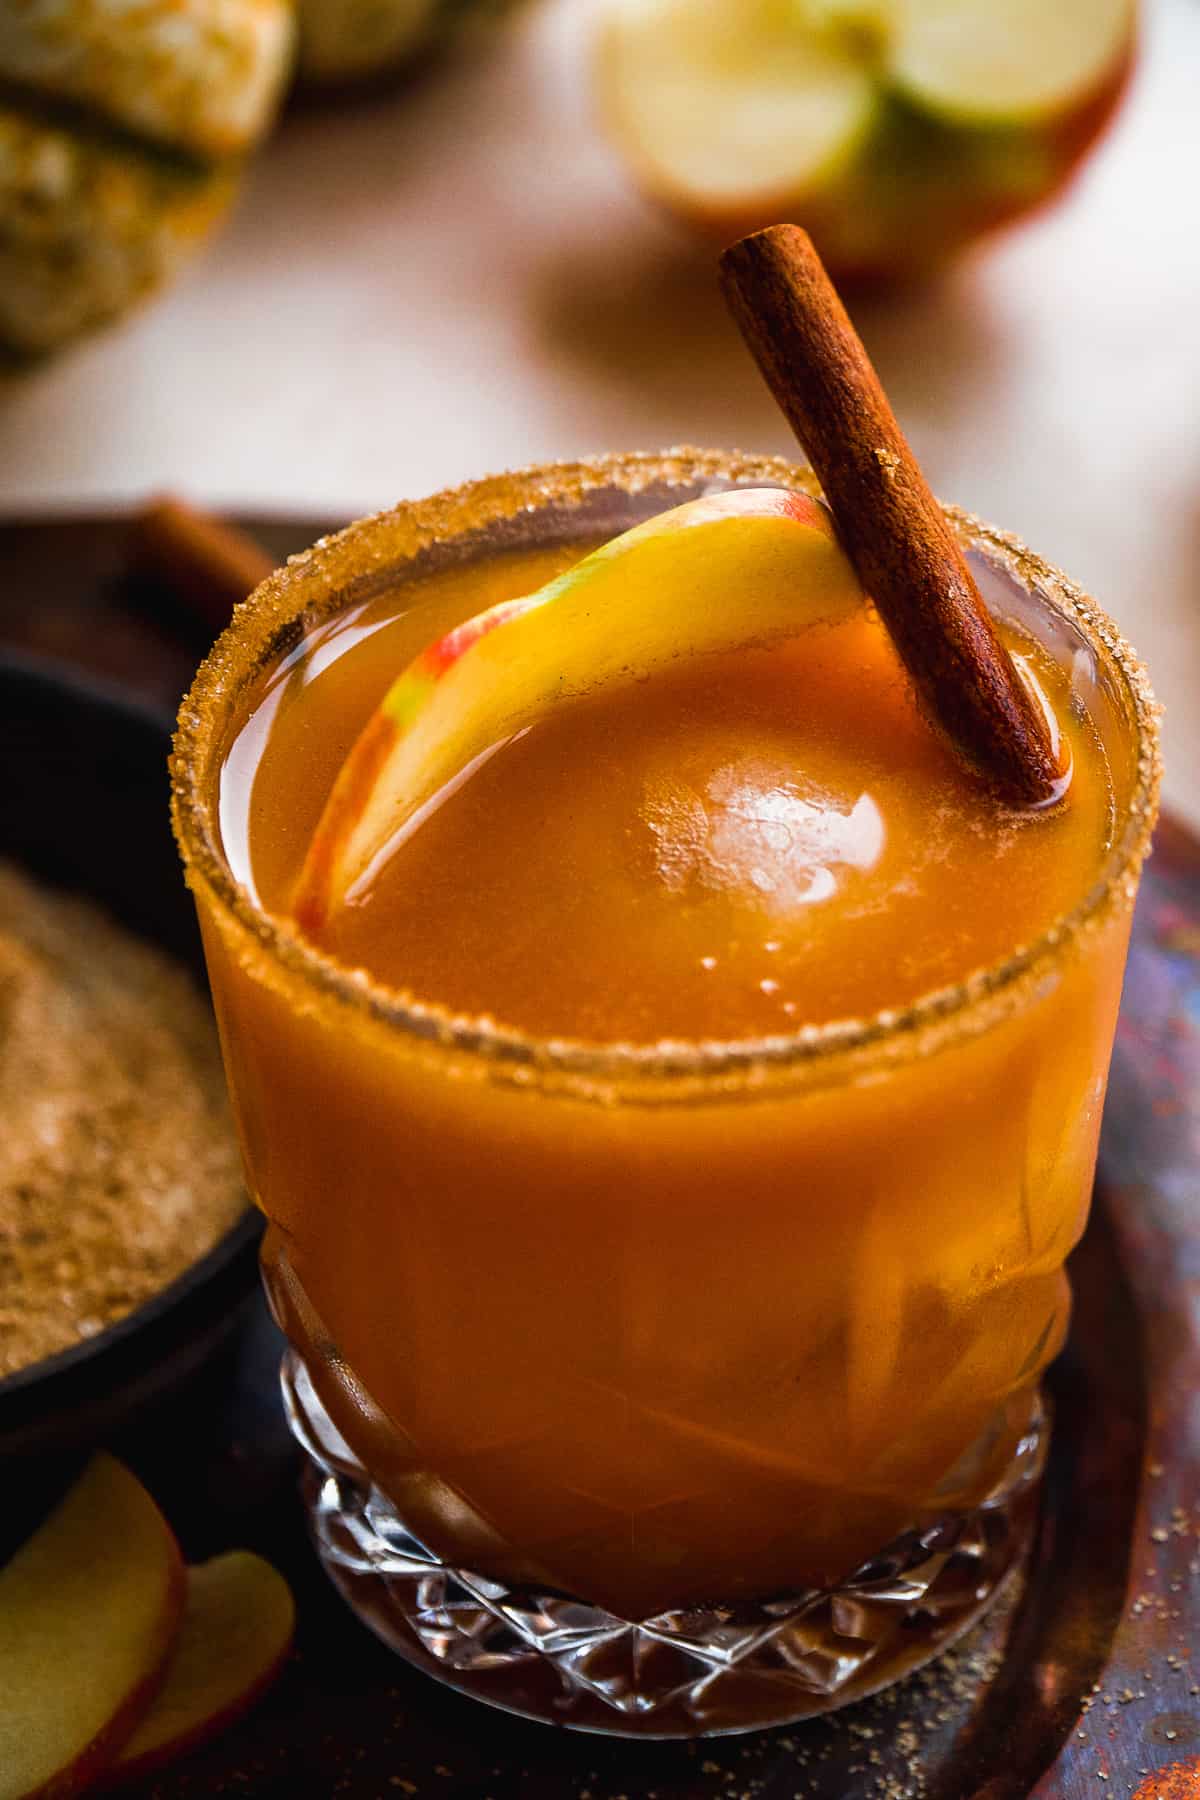 Up close image of a pumpkin cocktail with cinnamon stick inside.